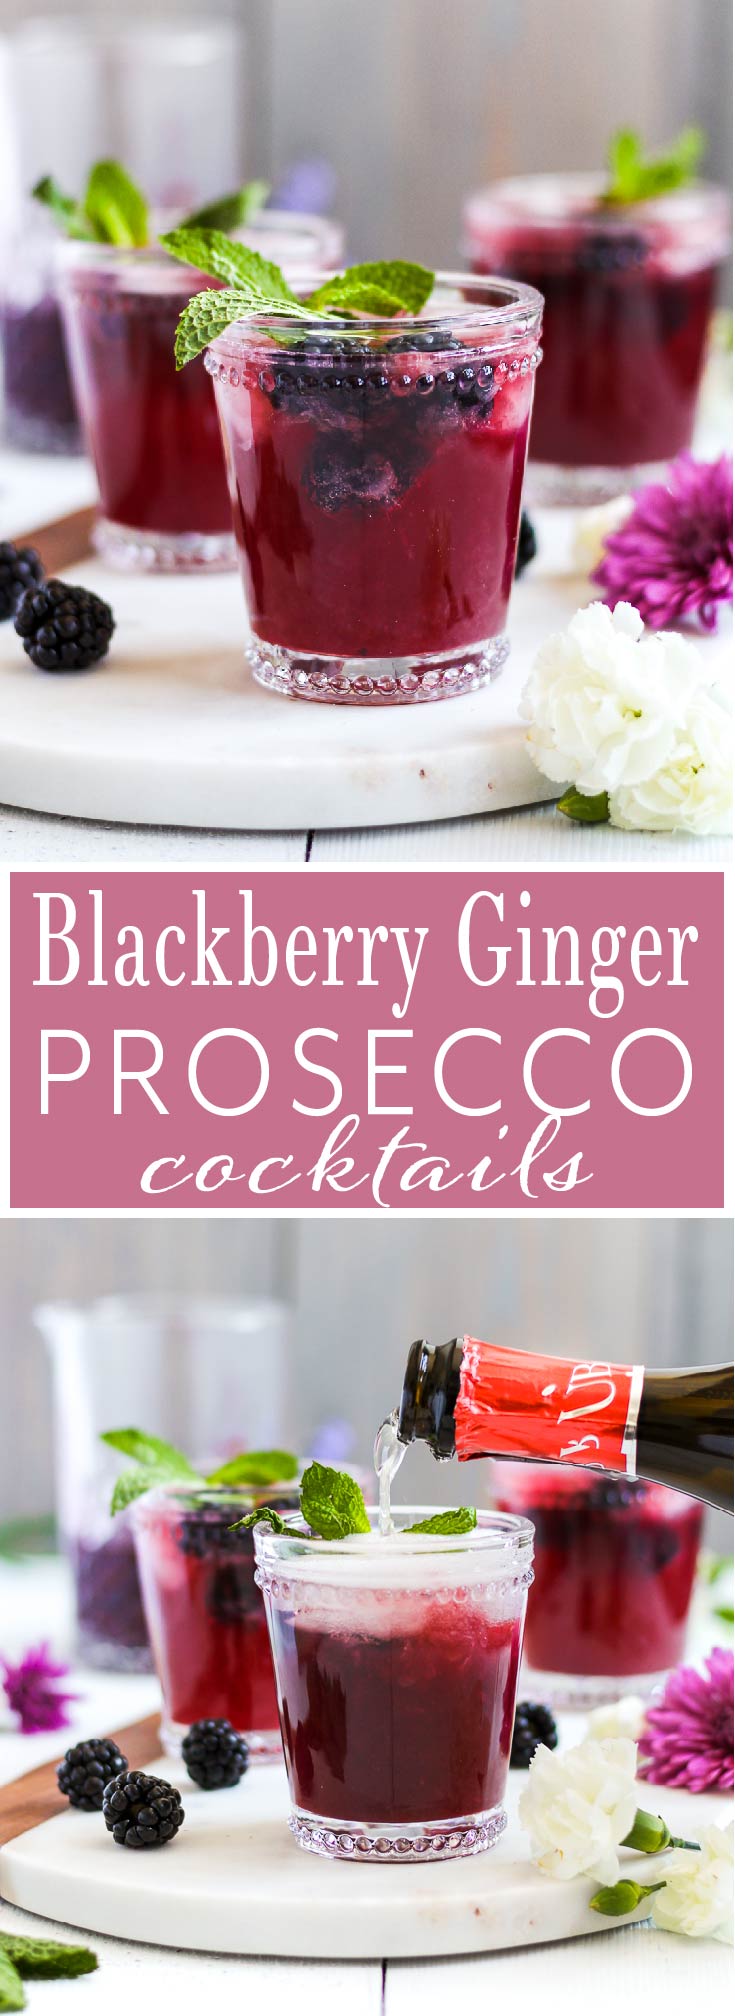 Your new drink of spring and summer! Easy, homemade blackberry ginger simple syrup pairs with lime, vodka and Prosecco creating a tasty and refreshing cocktail that’s perfect for brunch, parties or just any that requires a drink or two.